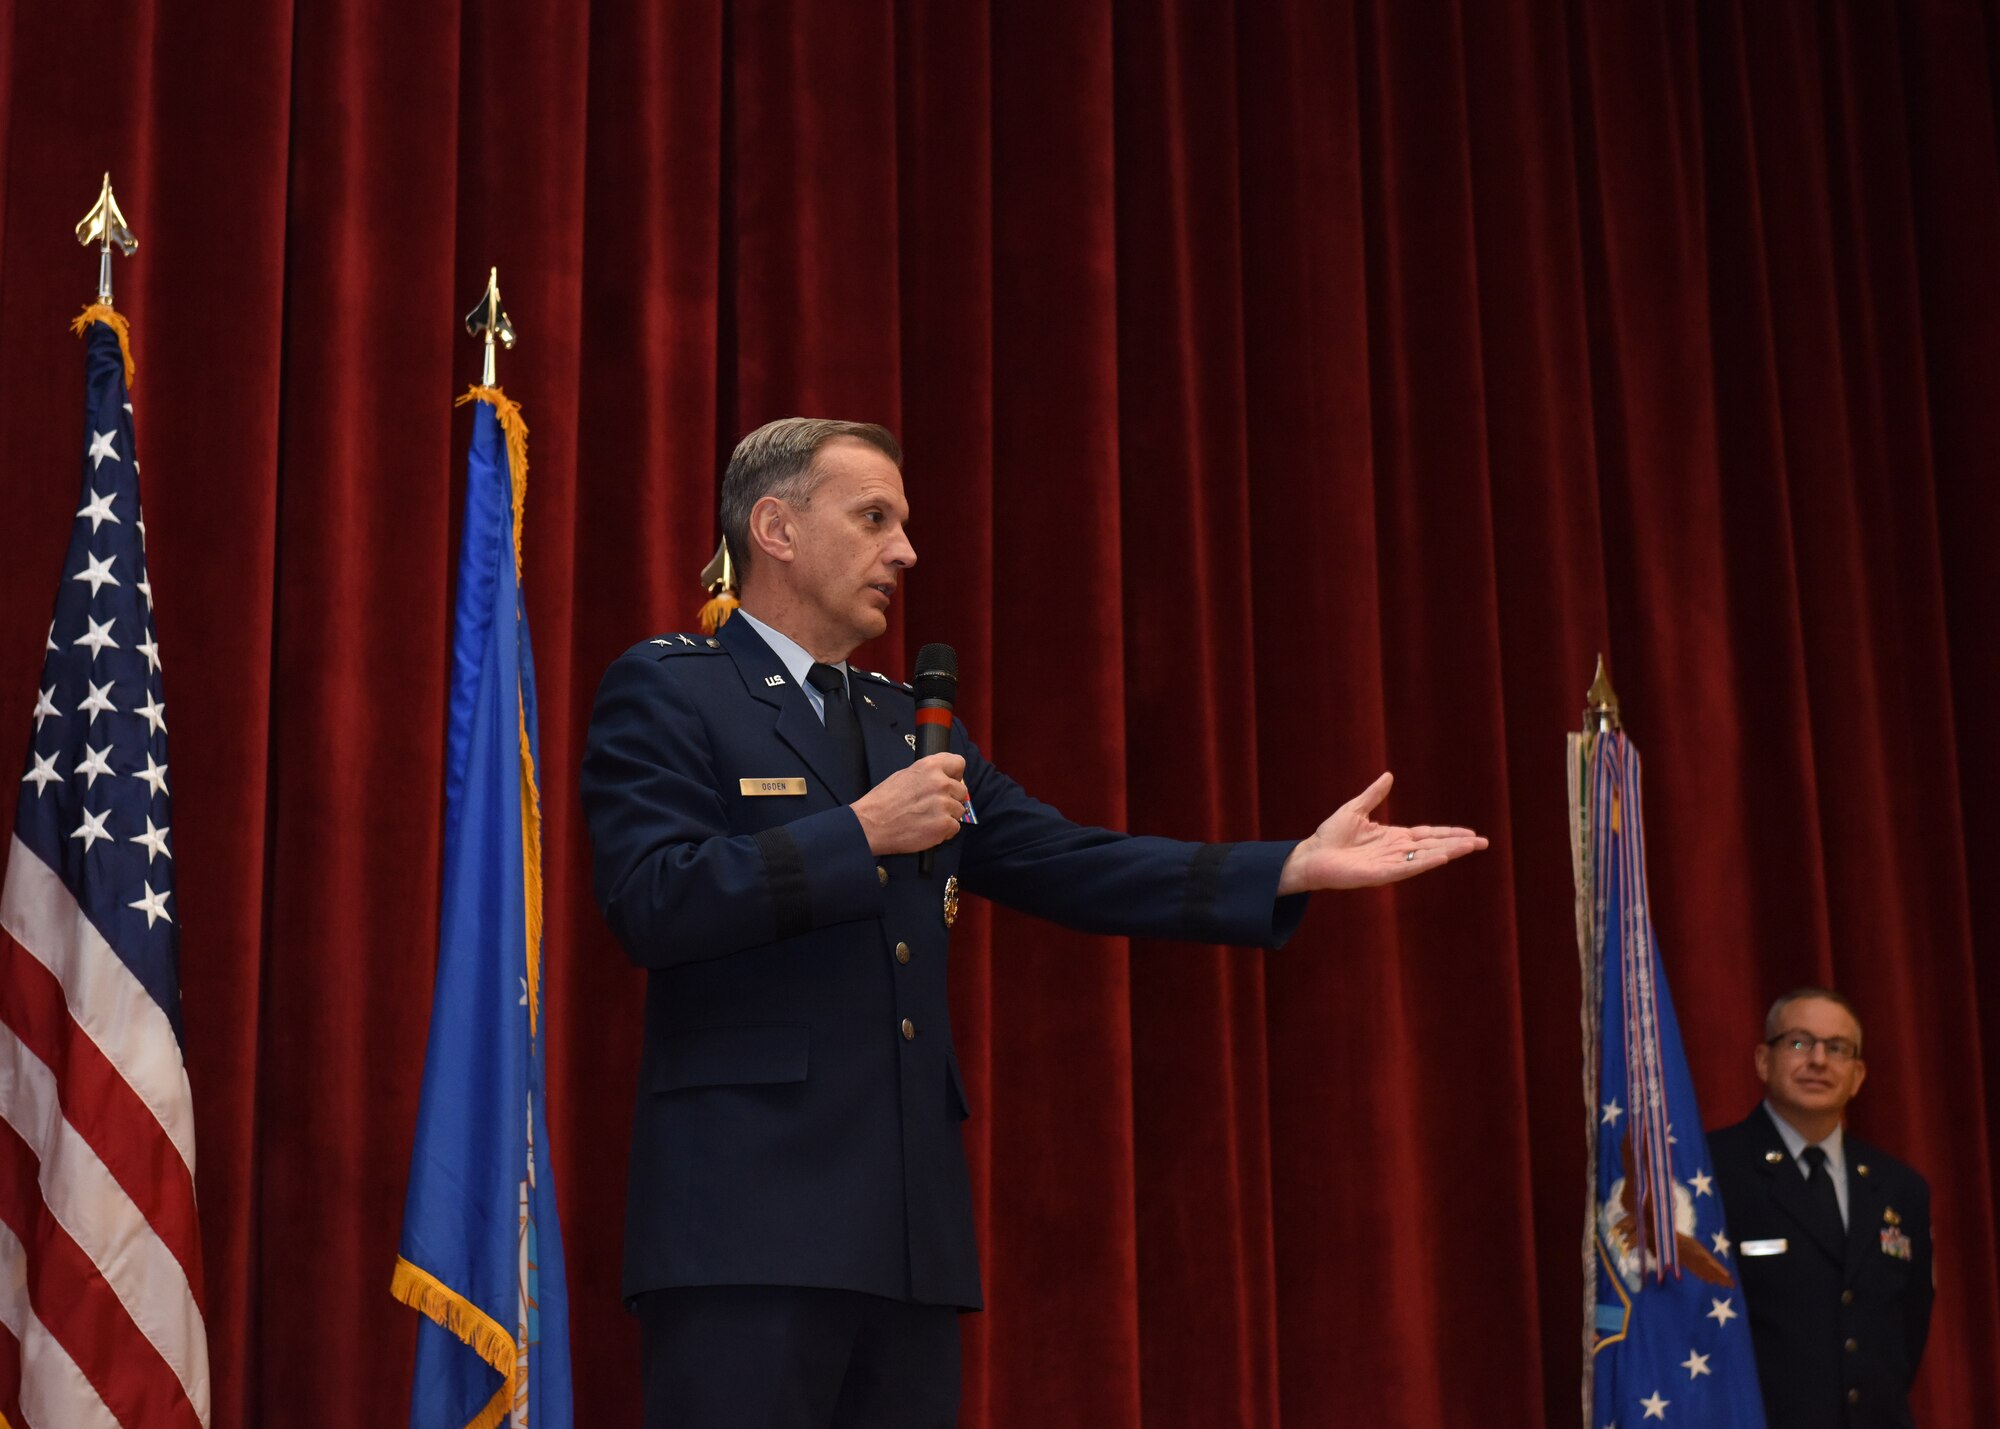 Maj. Gen. Randall A. Ogden, 4th Air Force commander, introduces Col. John F. Robinson as the new commander of the 911th Airlift Wing during a ceremony at Moon Area Middle School in Coraopolis, Pennsylvania, Nov. 2, 2019.